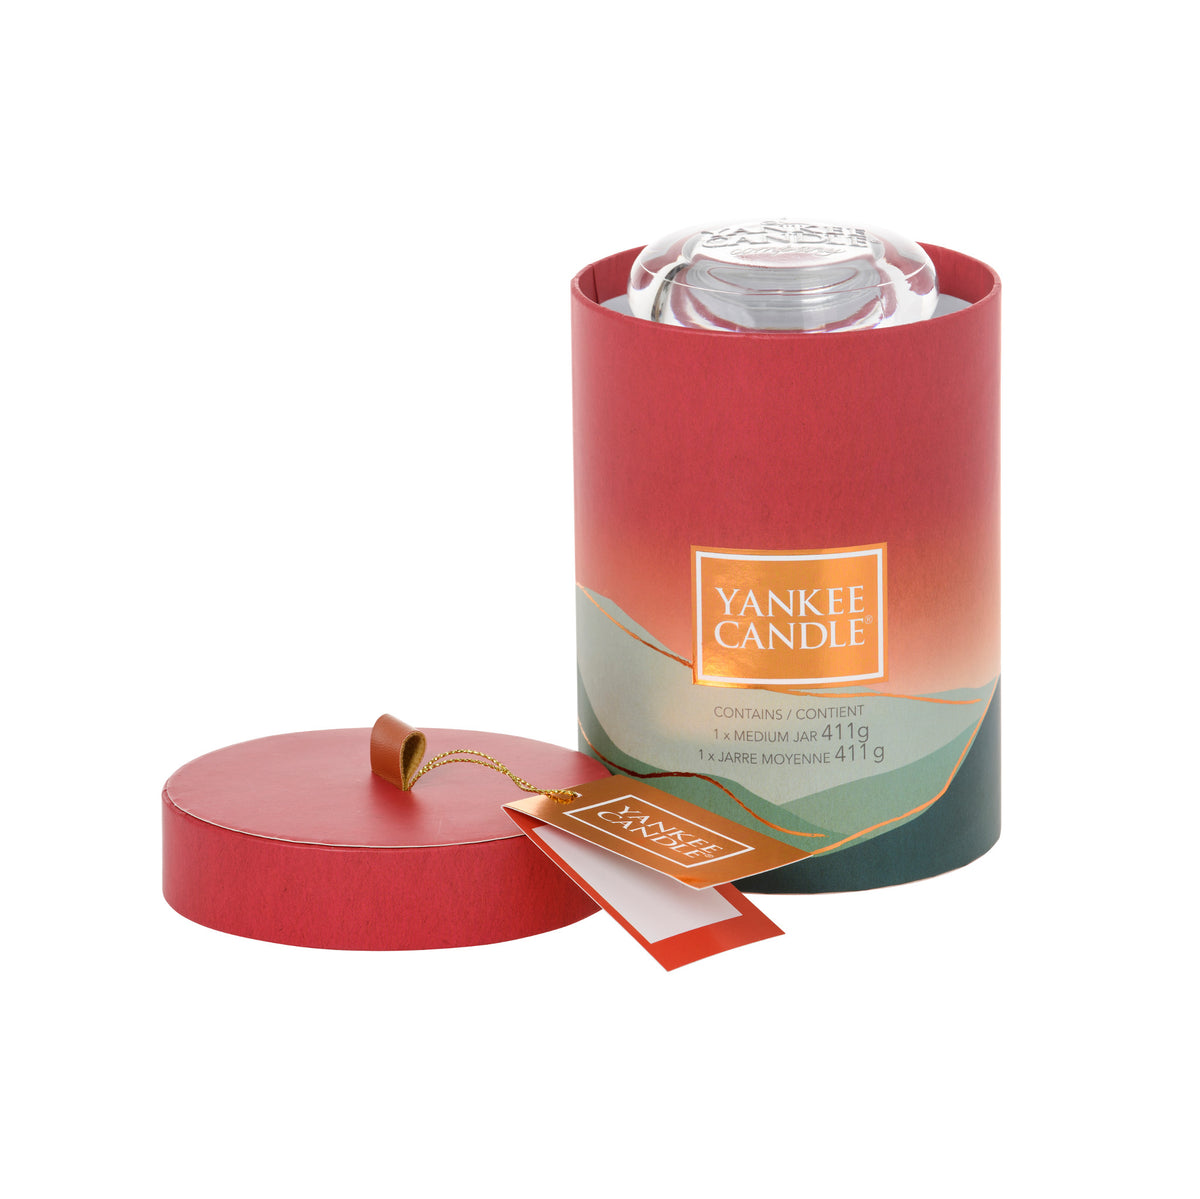 SET GIARA MEDIA -Yankee Candle- Confezione Regalo Just Go – Candle With Care